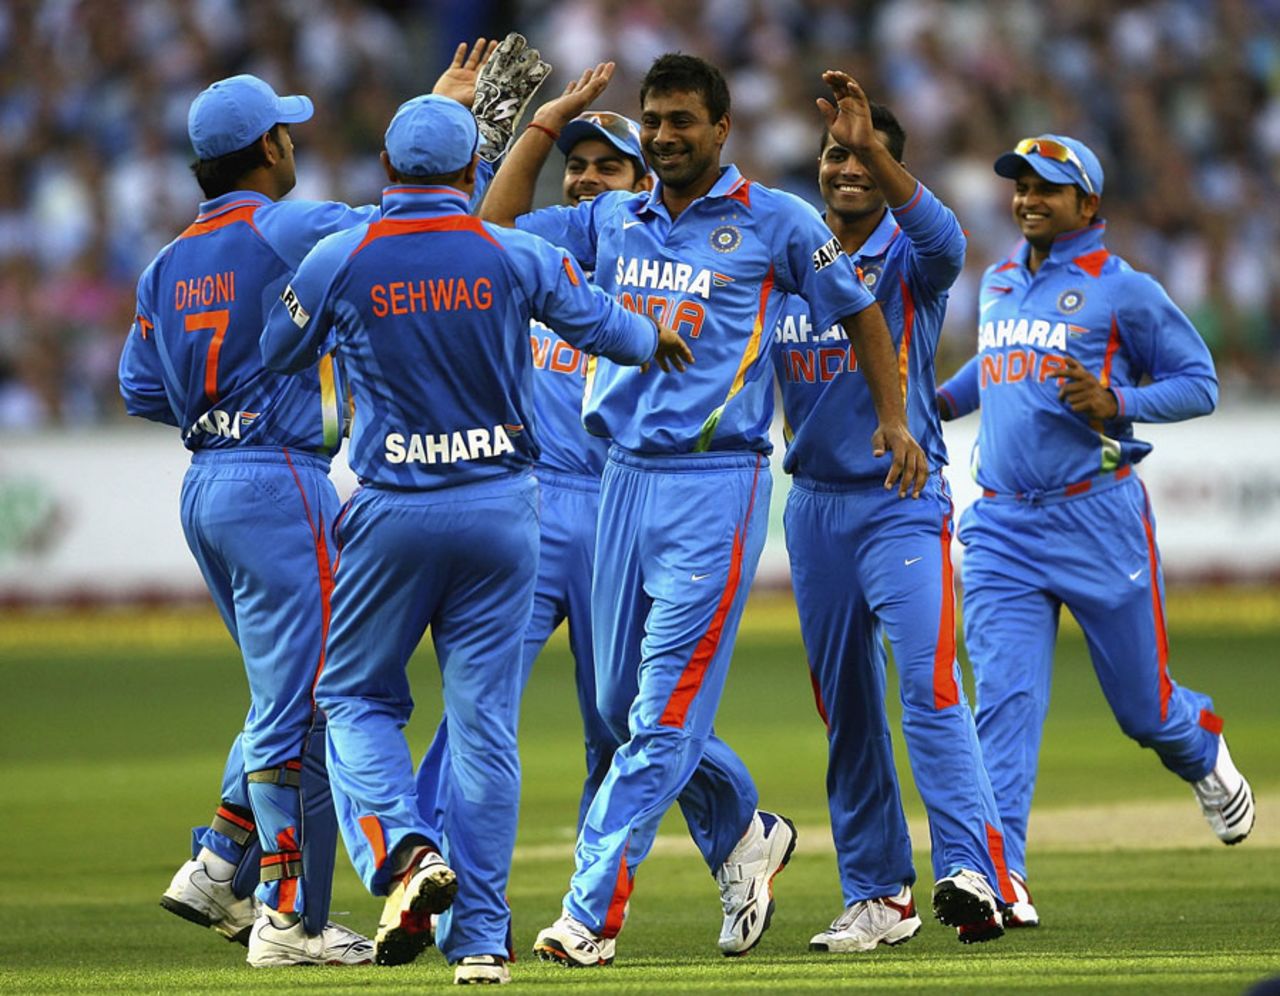 India get together after one of Praveen Kumar's strikes, Australia v India, 2nd T20I, Melbourne, February 3, 2012